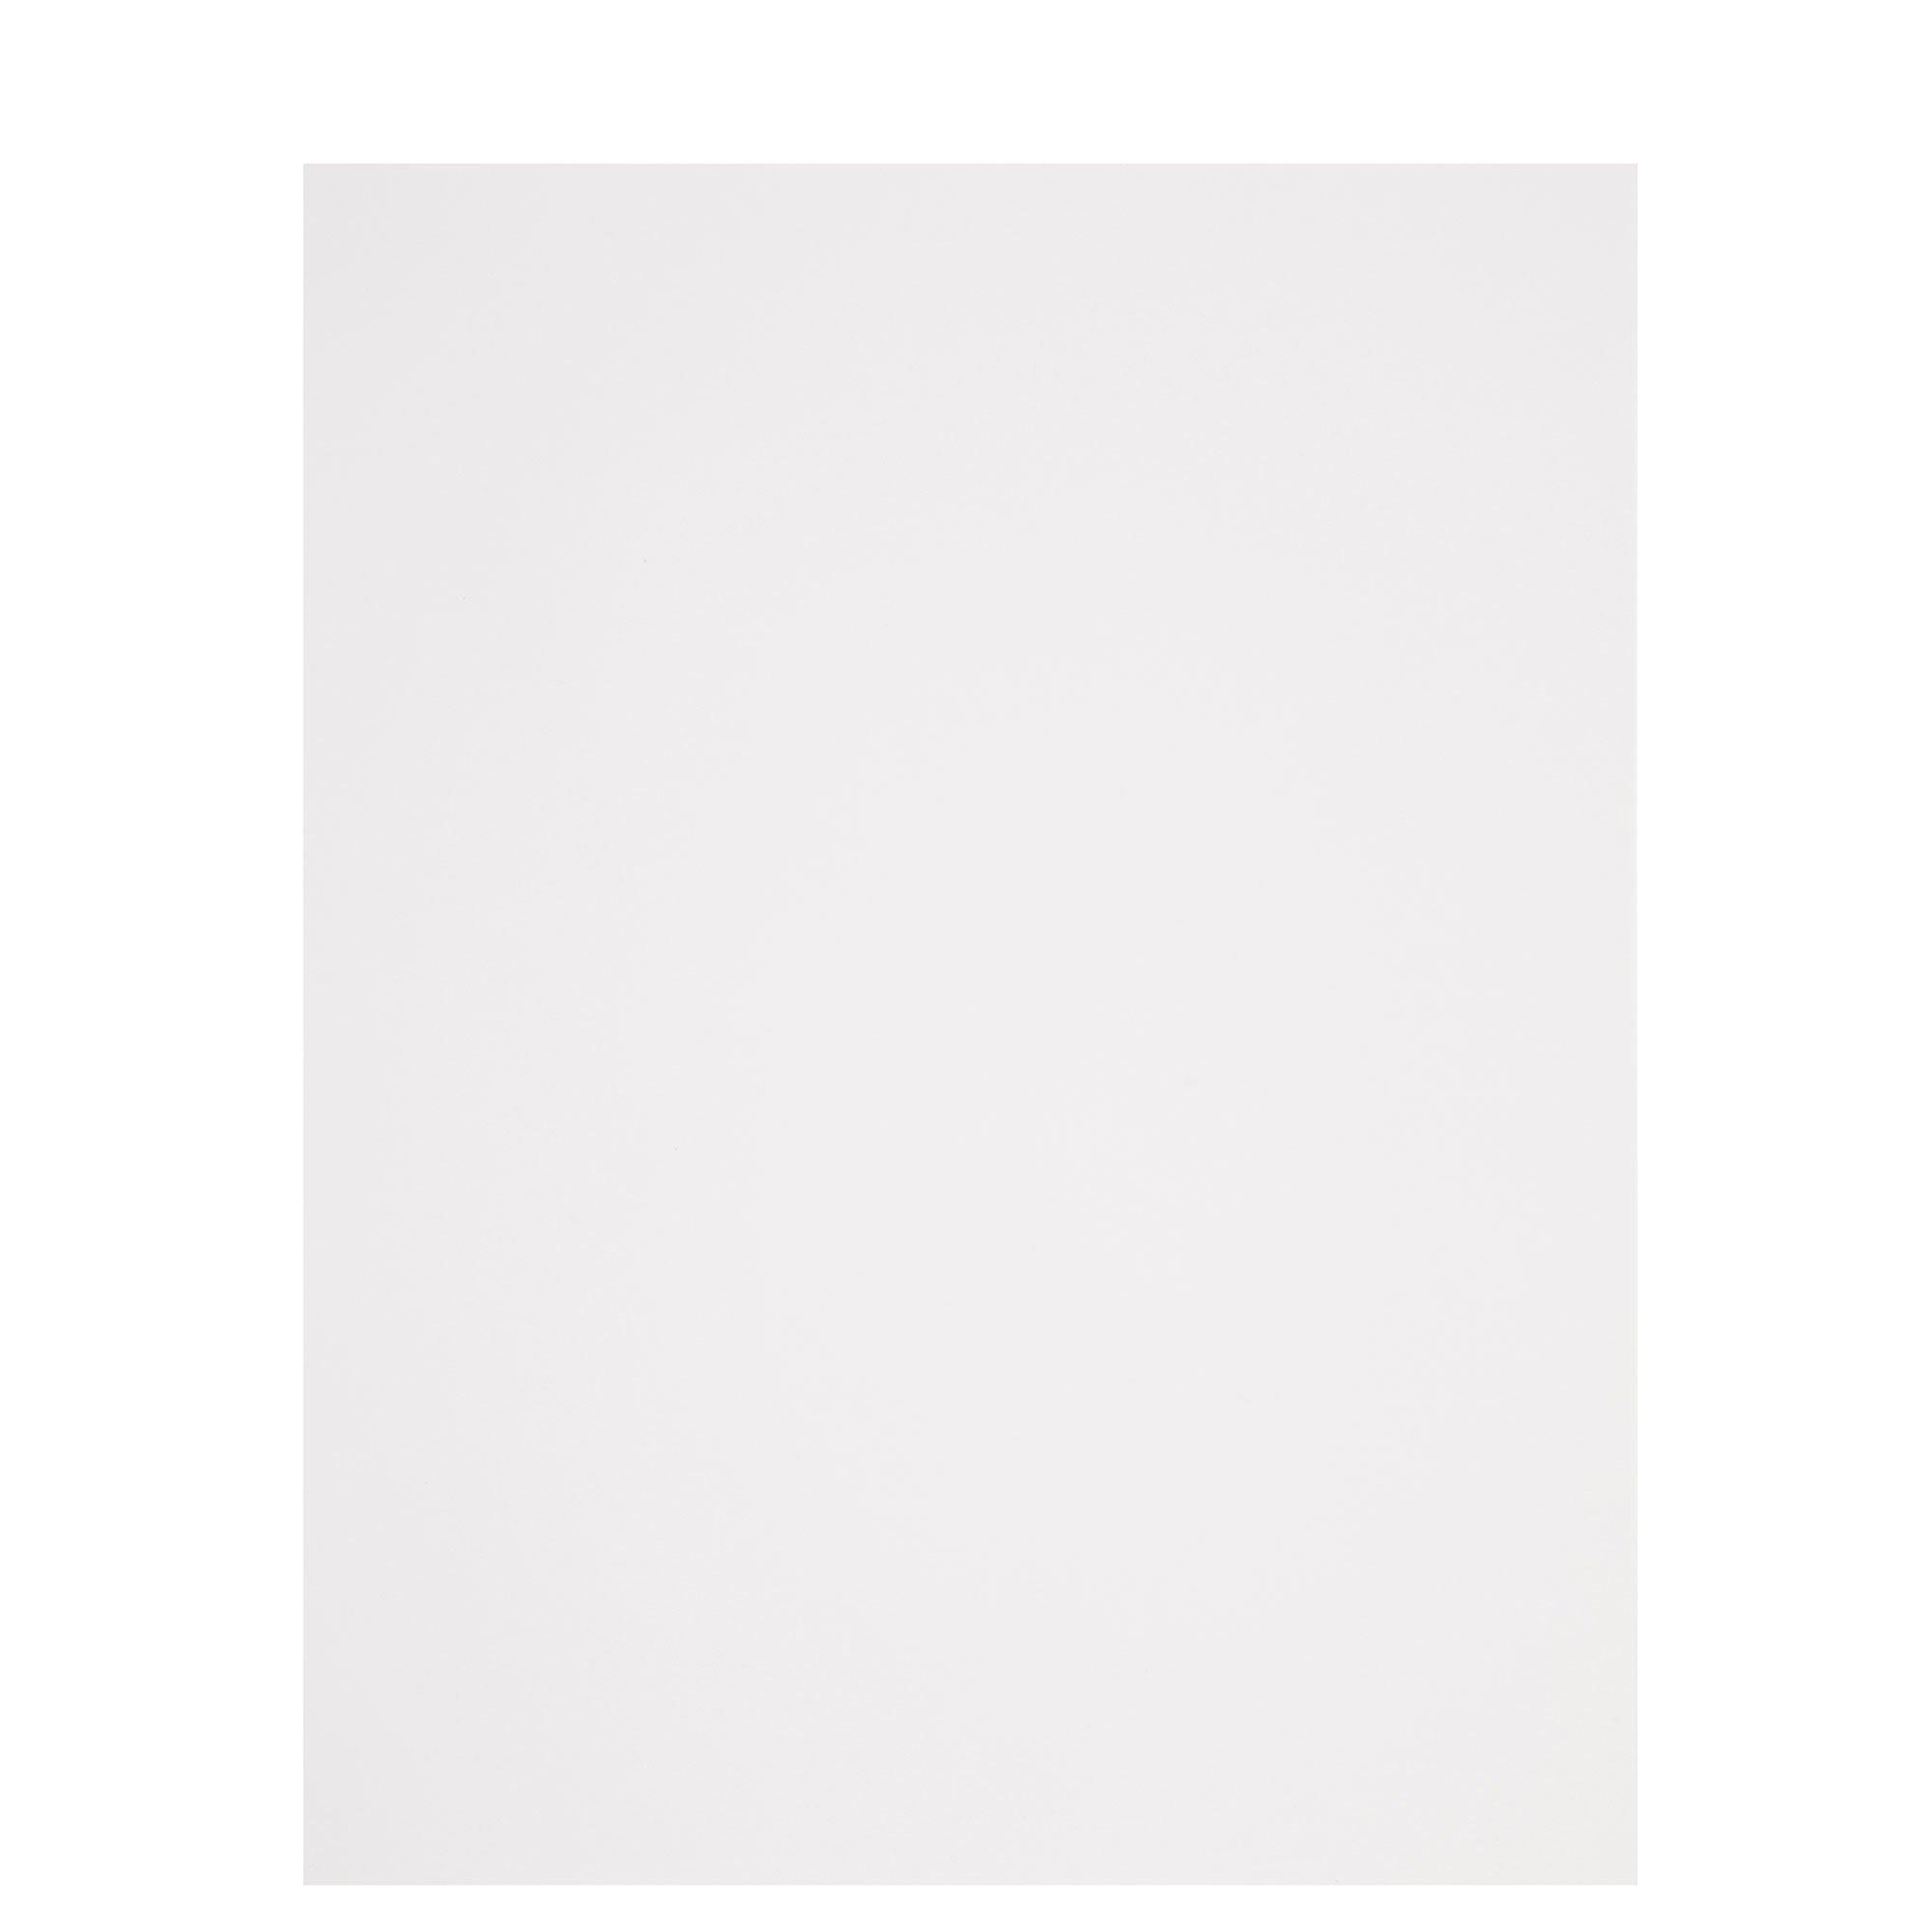 Ivory Scrapbooking Cardstock 8.5 x 11 Size for sale